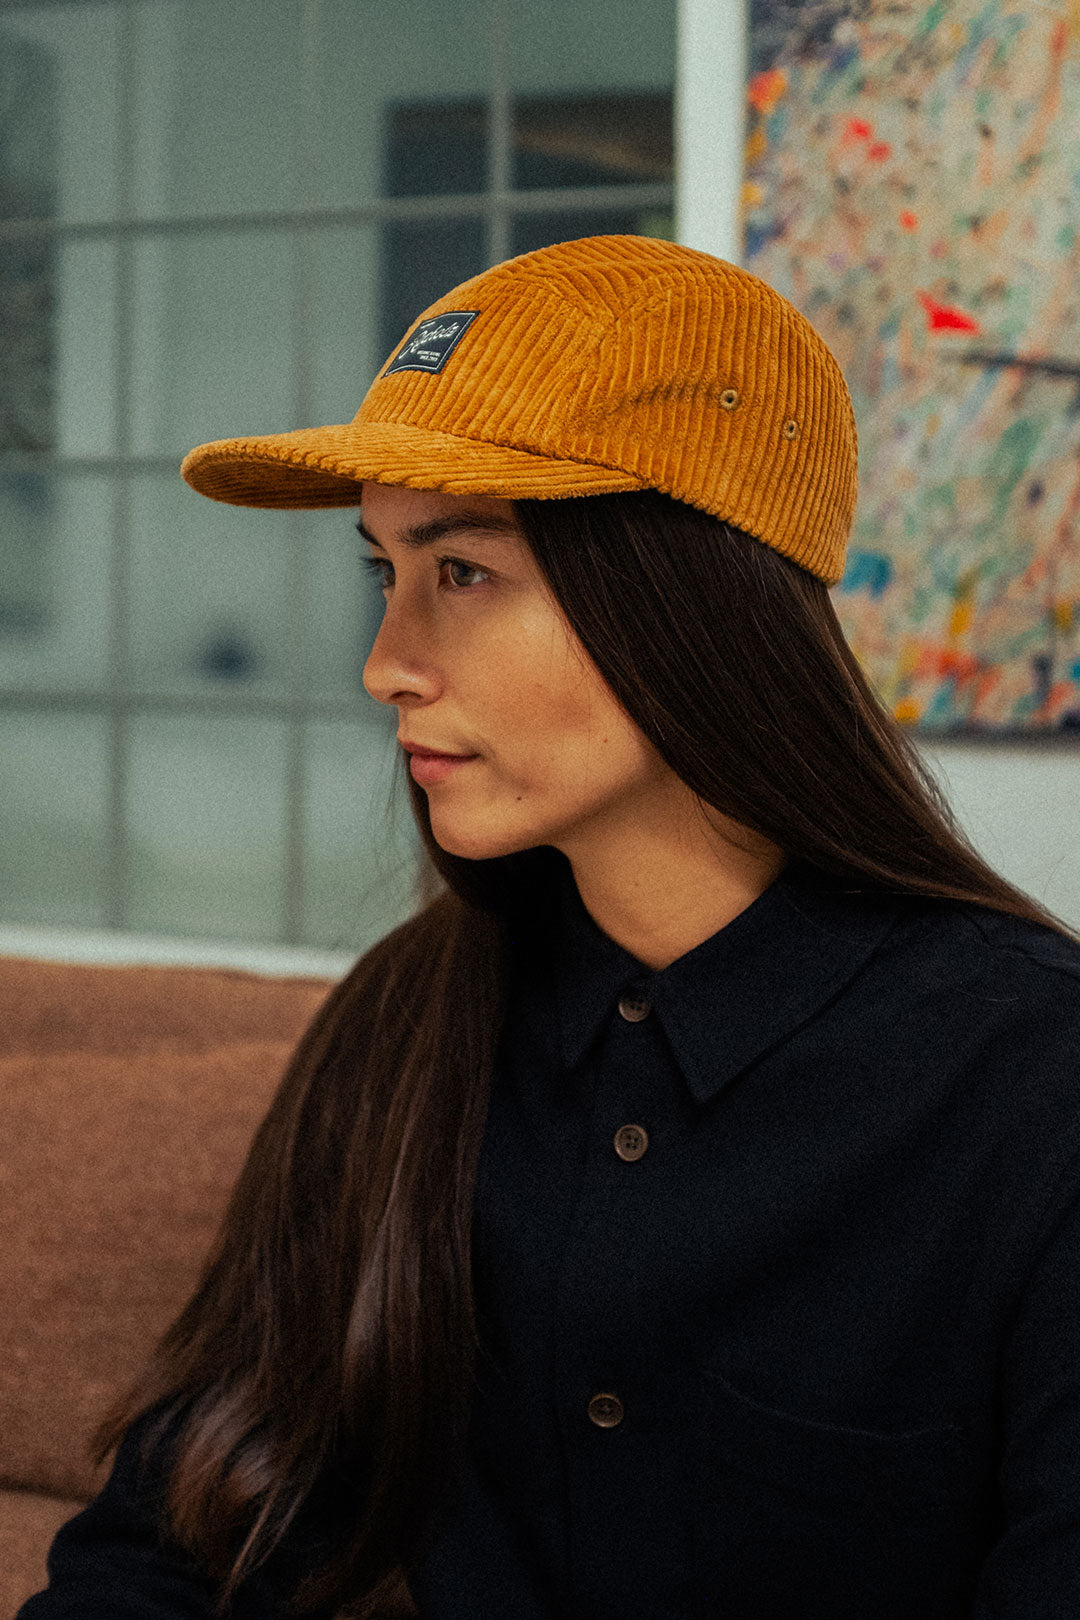 Toffee-colored 5-panel cord cap made from 100% organic cotton from Rotholz